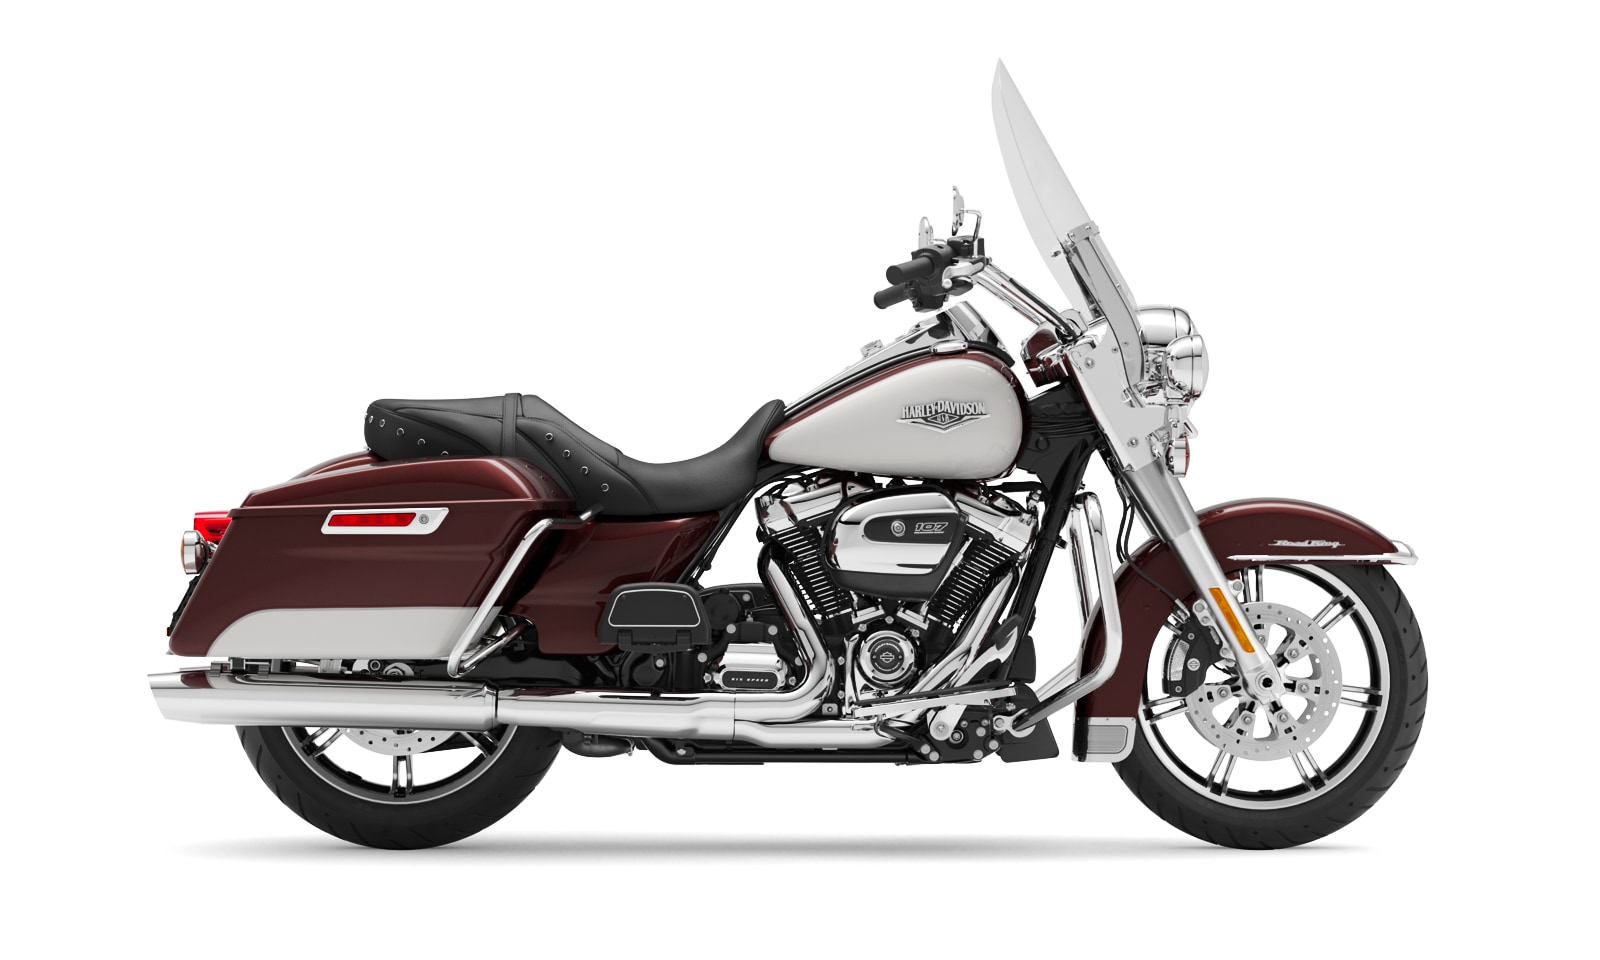 2019 Harley Davidson Road King Review On Common Tread